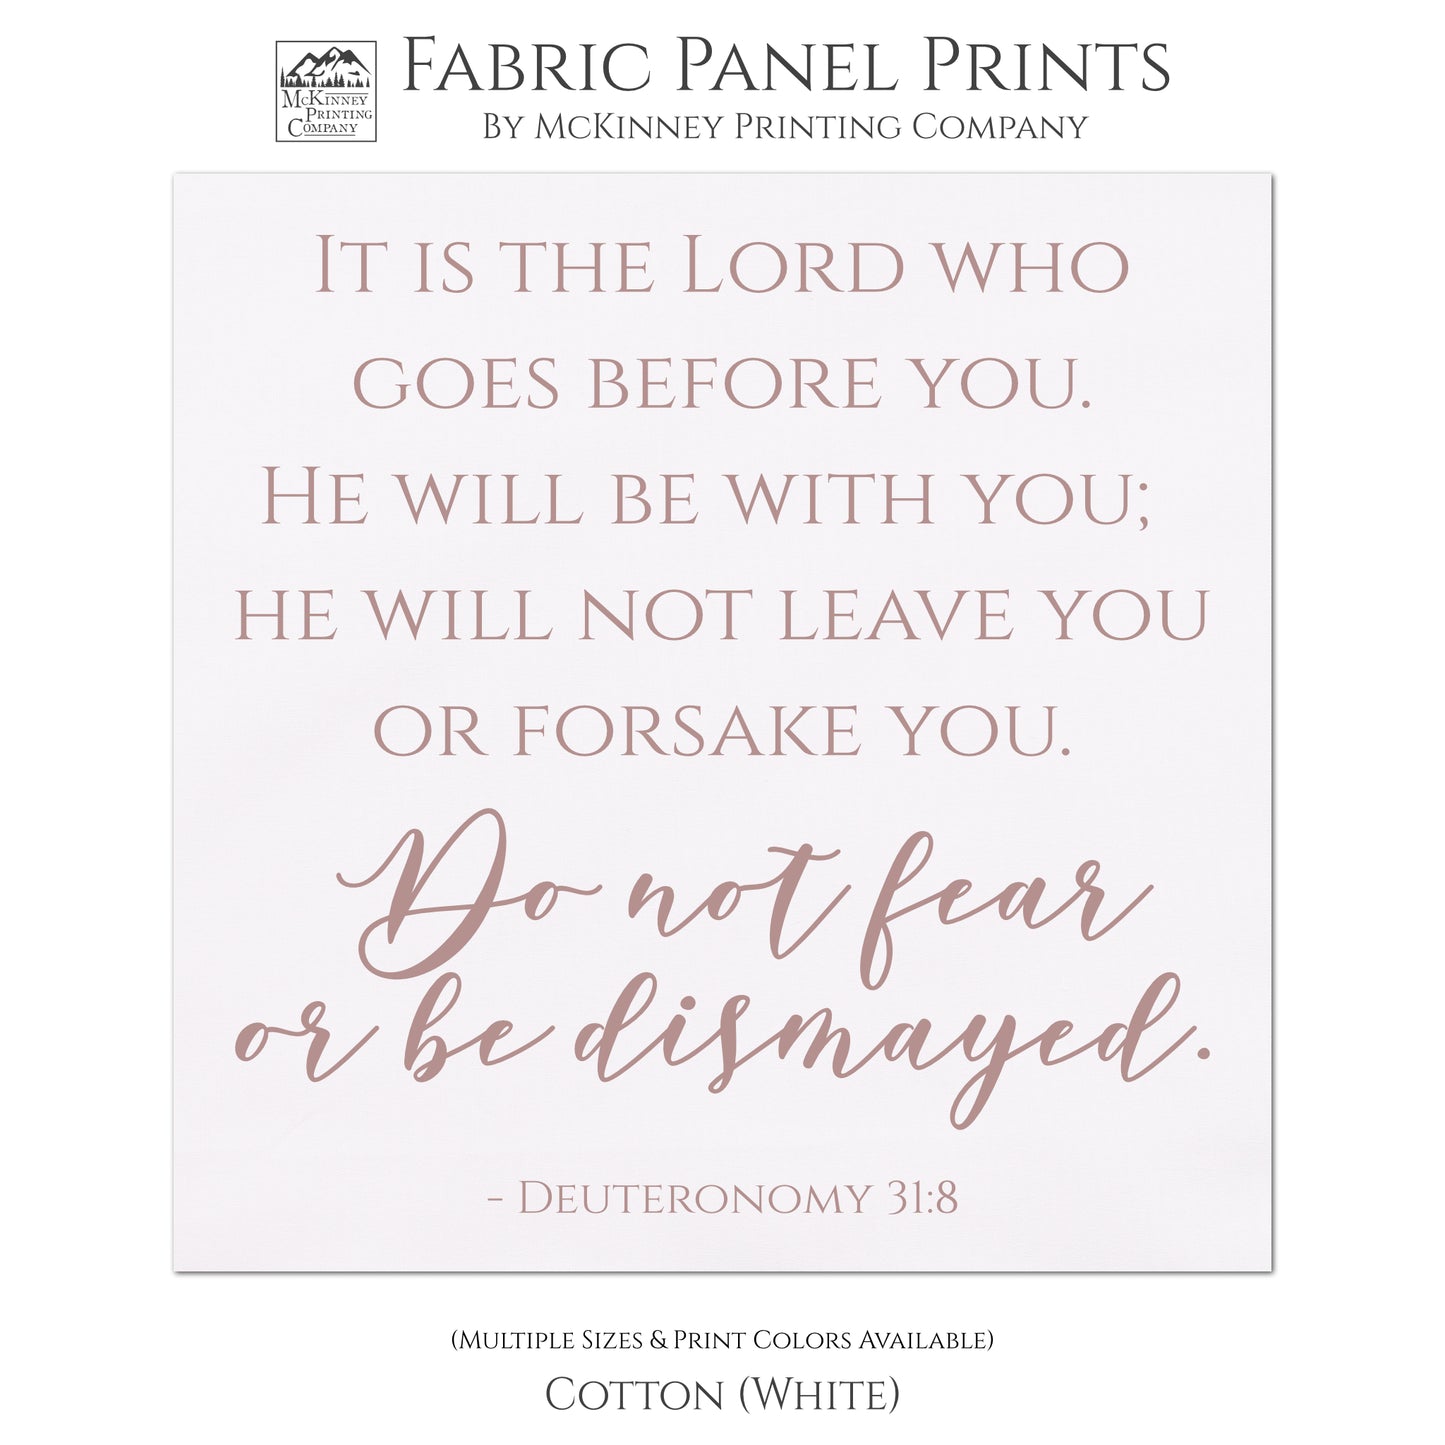 It is the Lord who goes before you. He will be with you; He will not leave you or forsake you. Do not fear or be dismayed. Deuteronomy 31:8 - Scripture Fabric Panel for Quilting and Crafting and Wall Art - Cotton, White